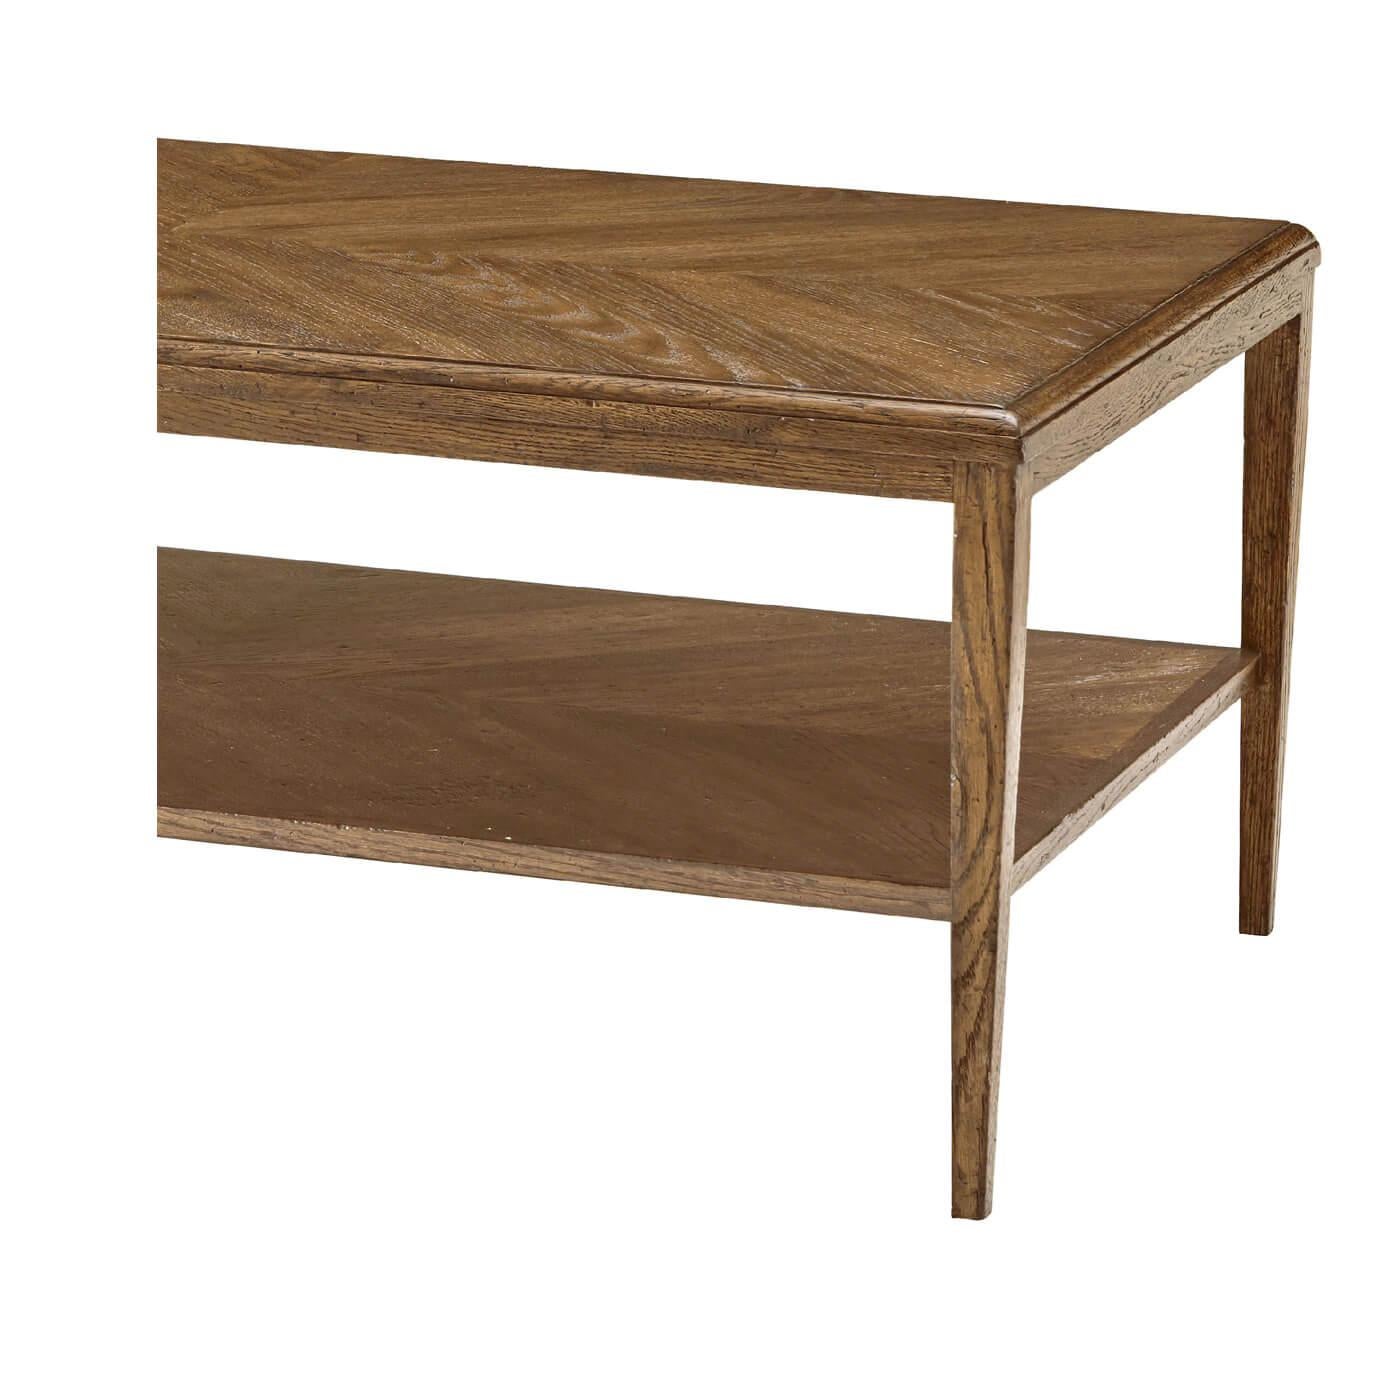 A modern oak coffee table crafted with light rustic oak. This two-tier coffee table features a concentric parquetry pattern on the top and bottom tiers. It rests on tapered oak legs. 
Dimensions
50